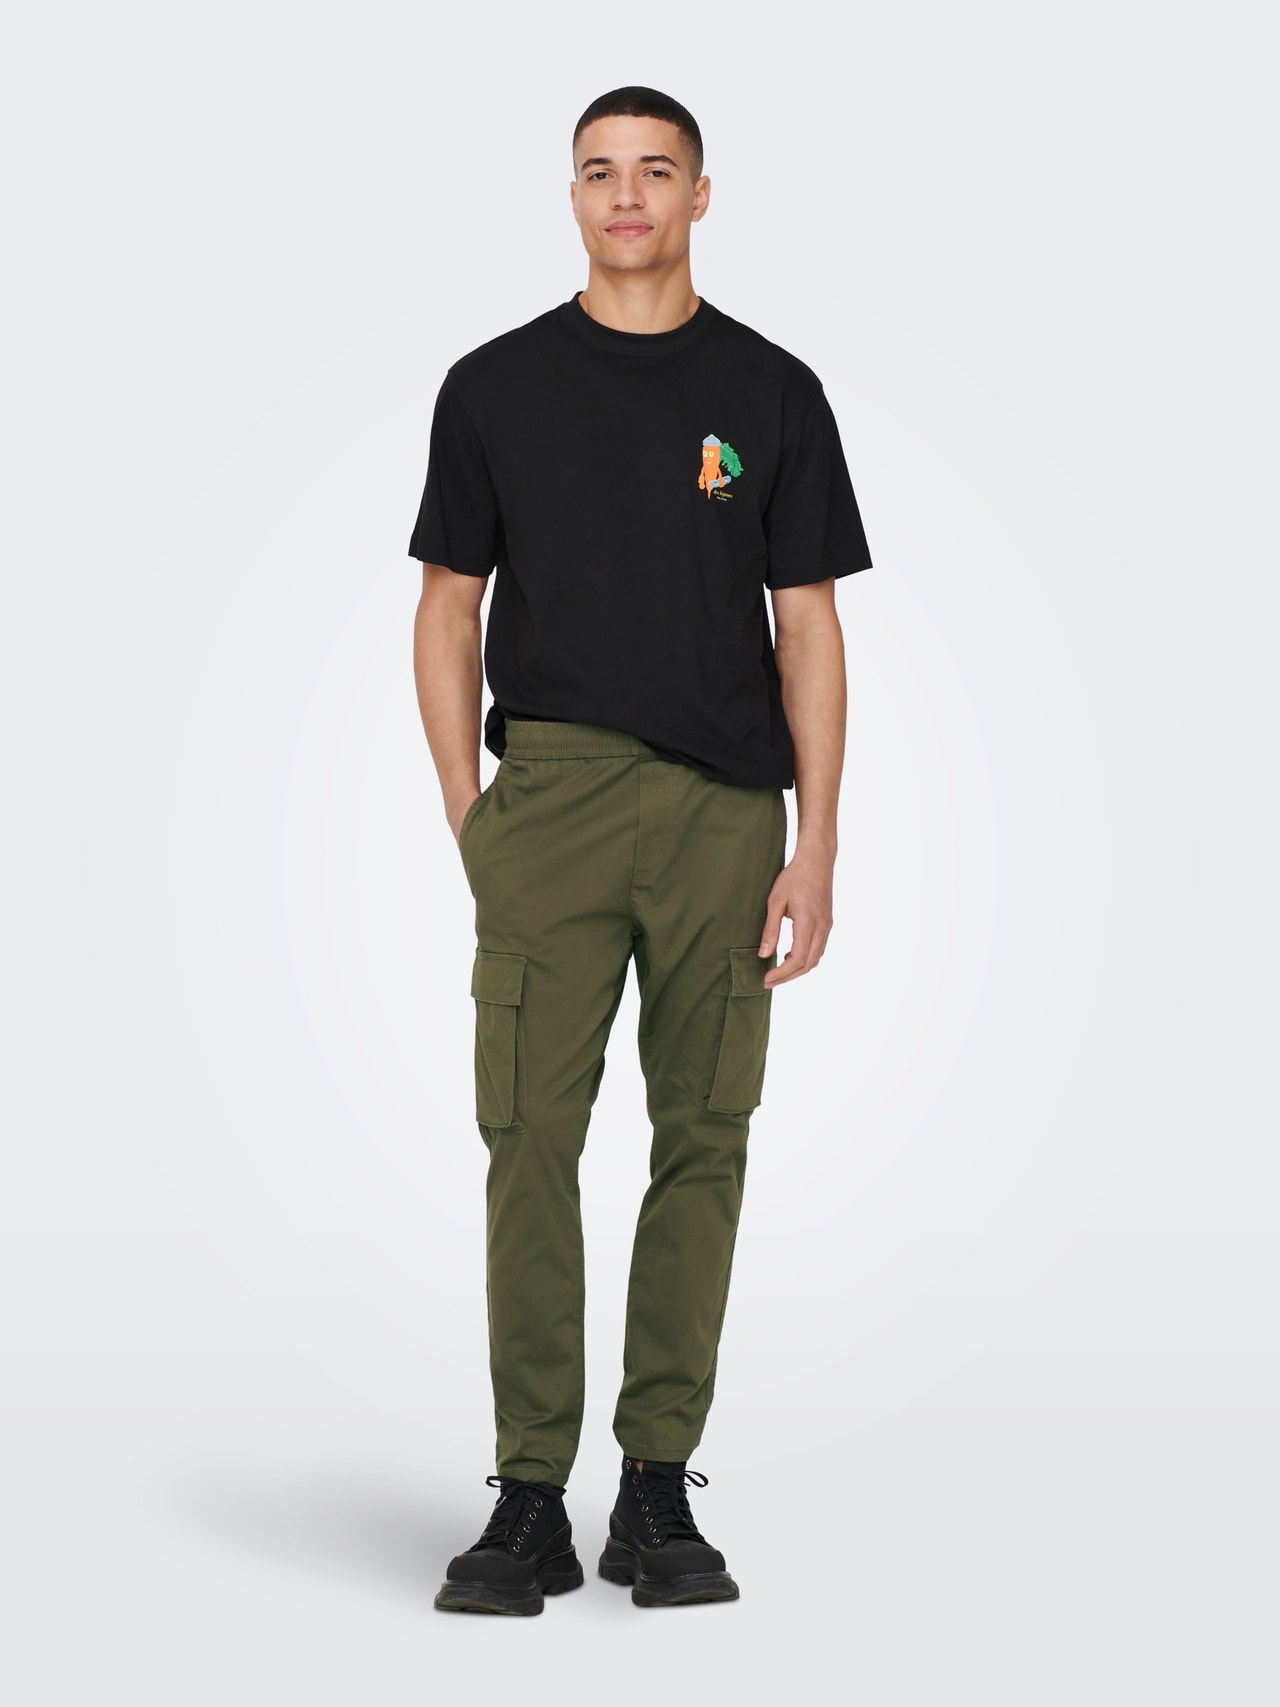 ONLY & SONS ONSCAM LINUS CARGO PANT PK 2366 -Olive Night - 22022366